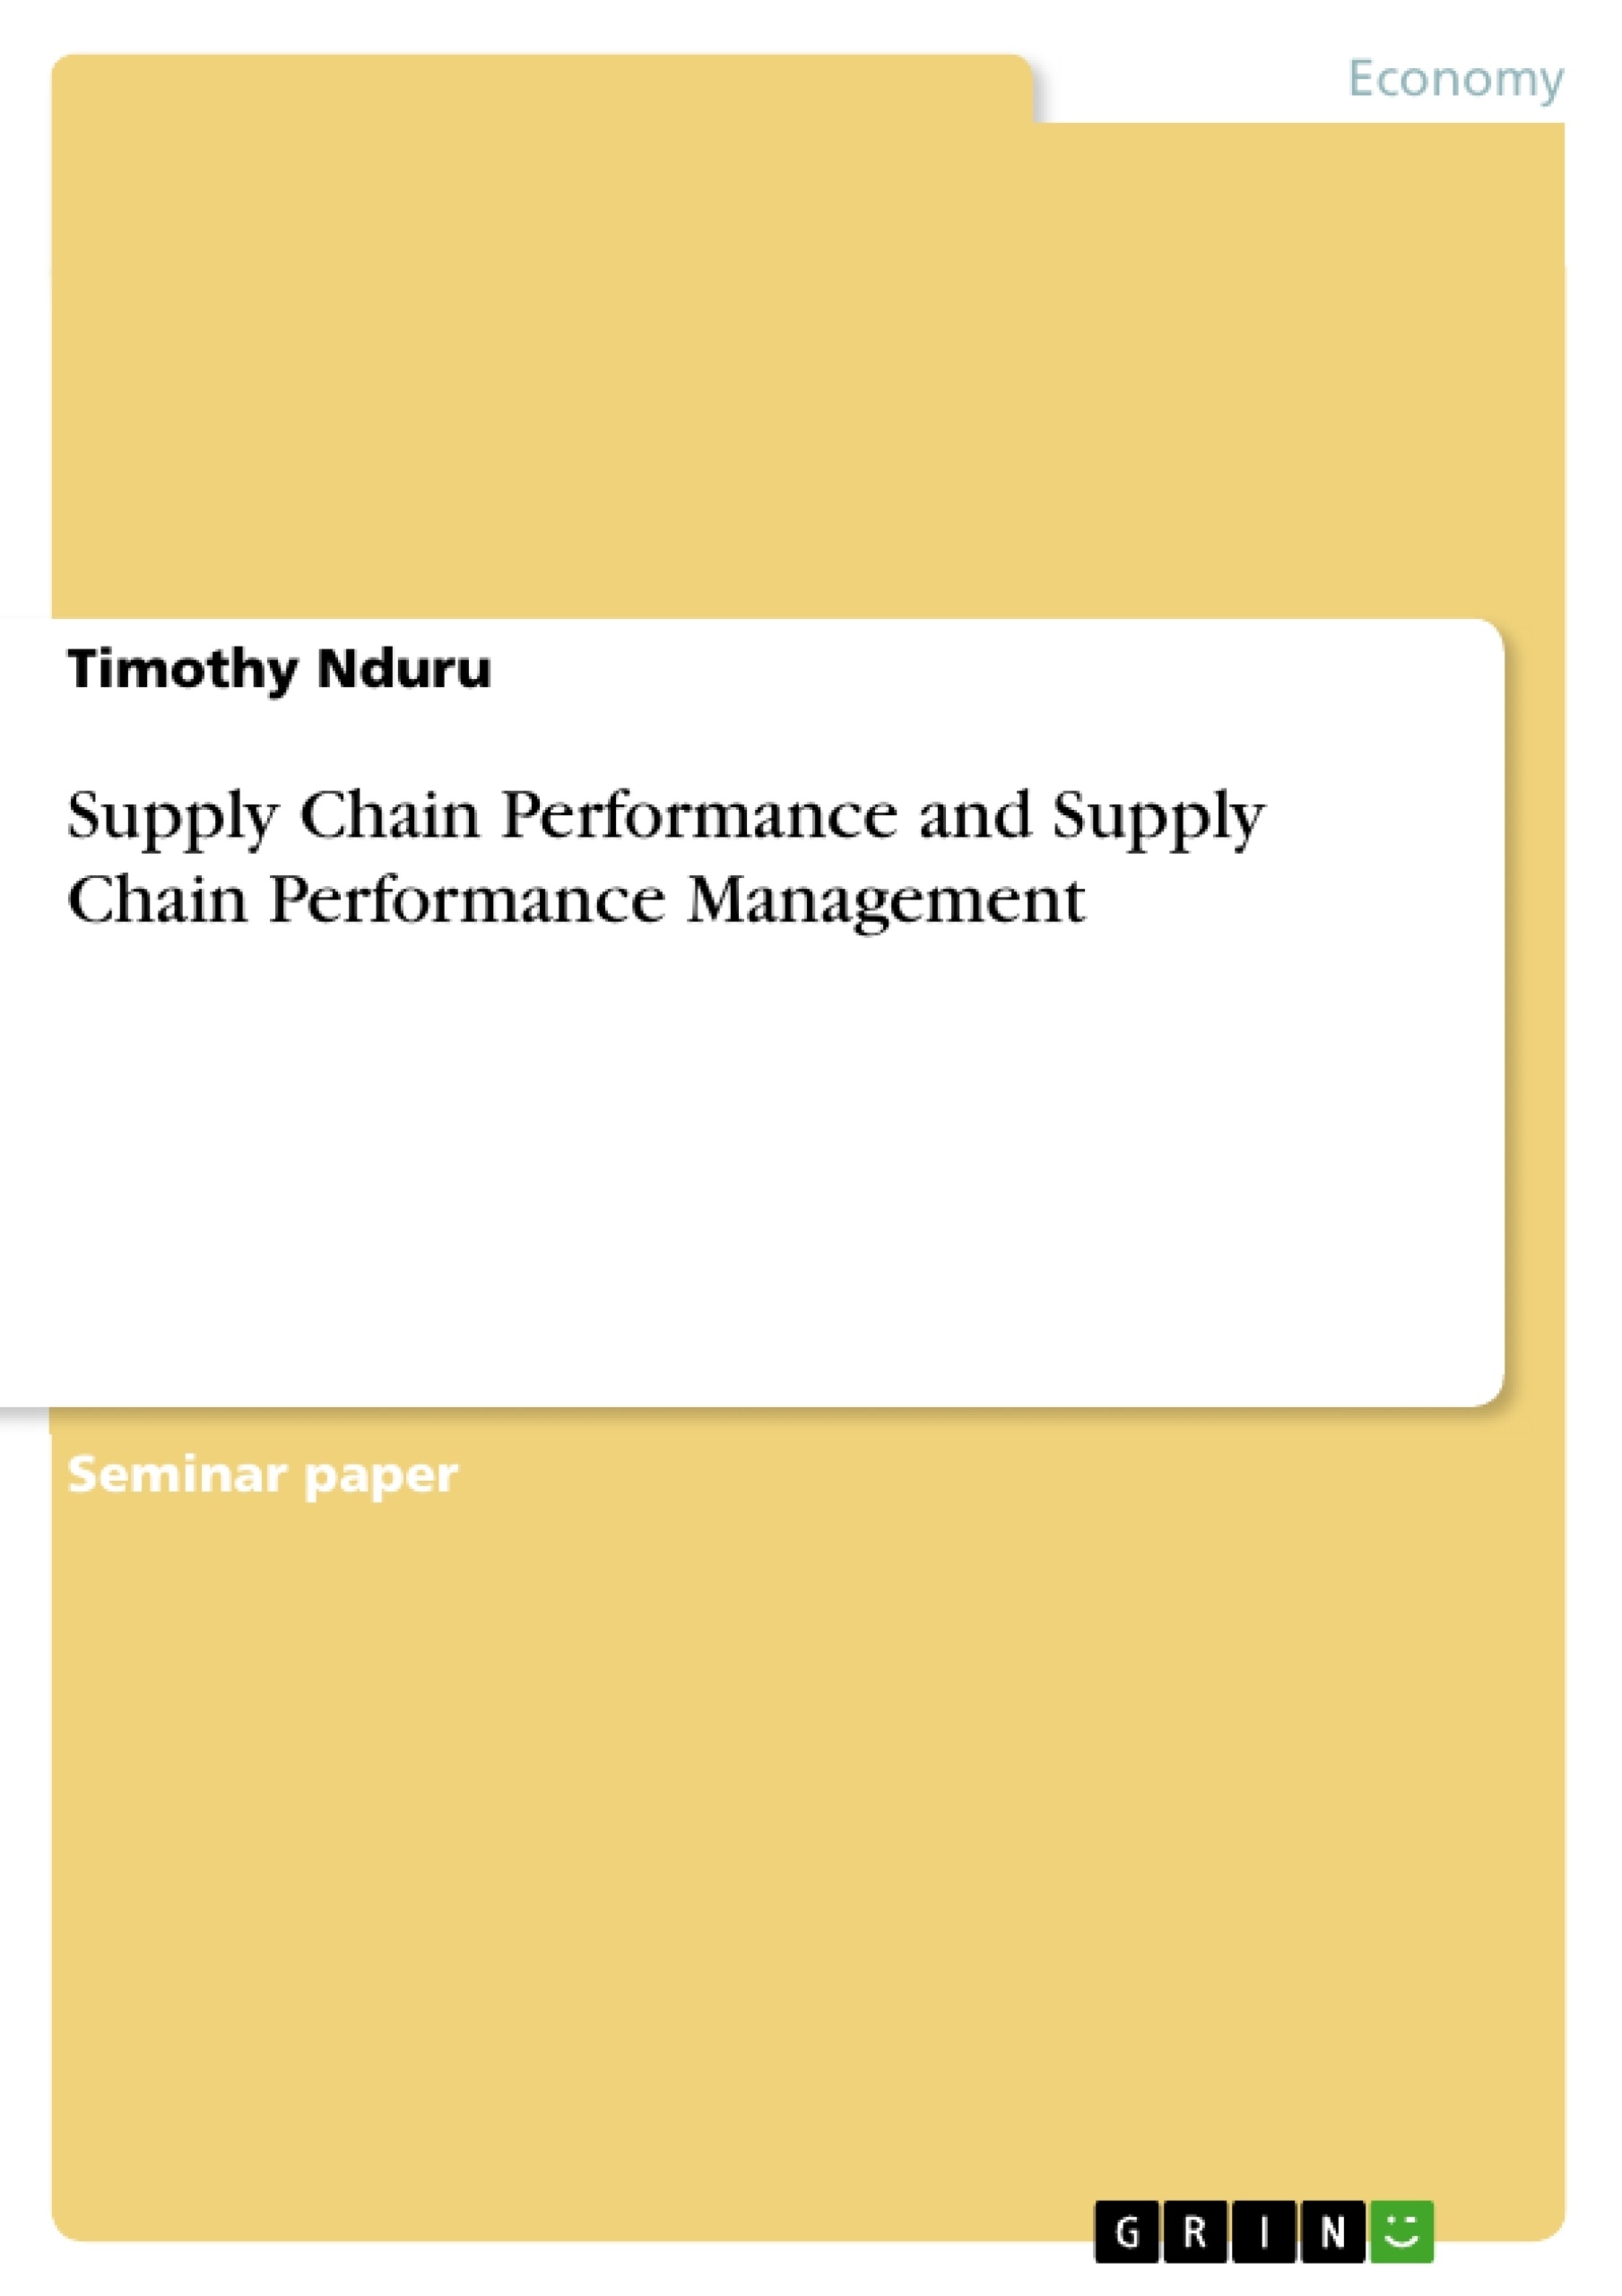 Title: Supply Chain Performance and Supply Chain Performance Management